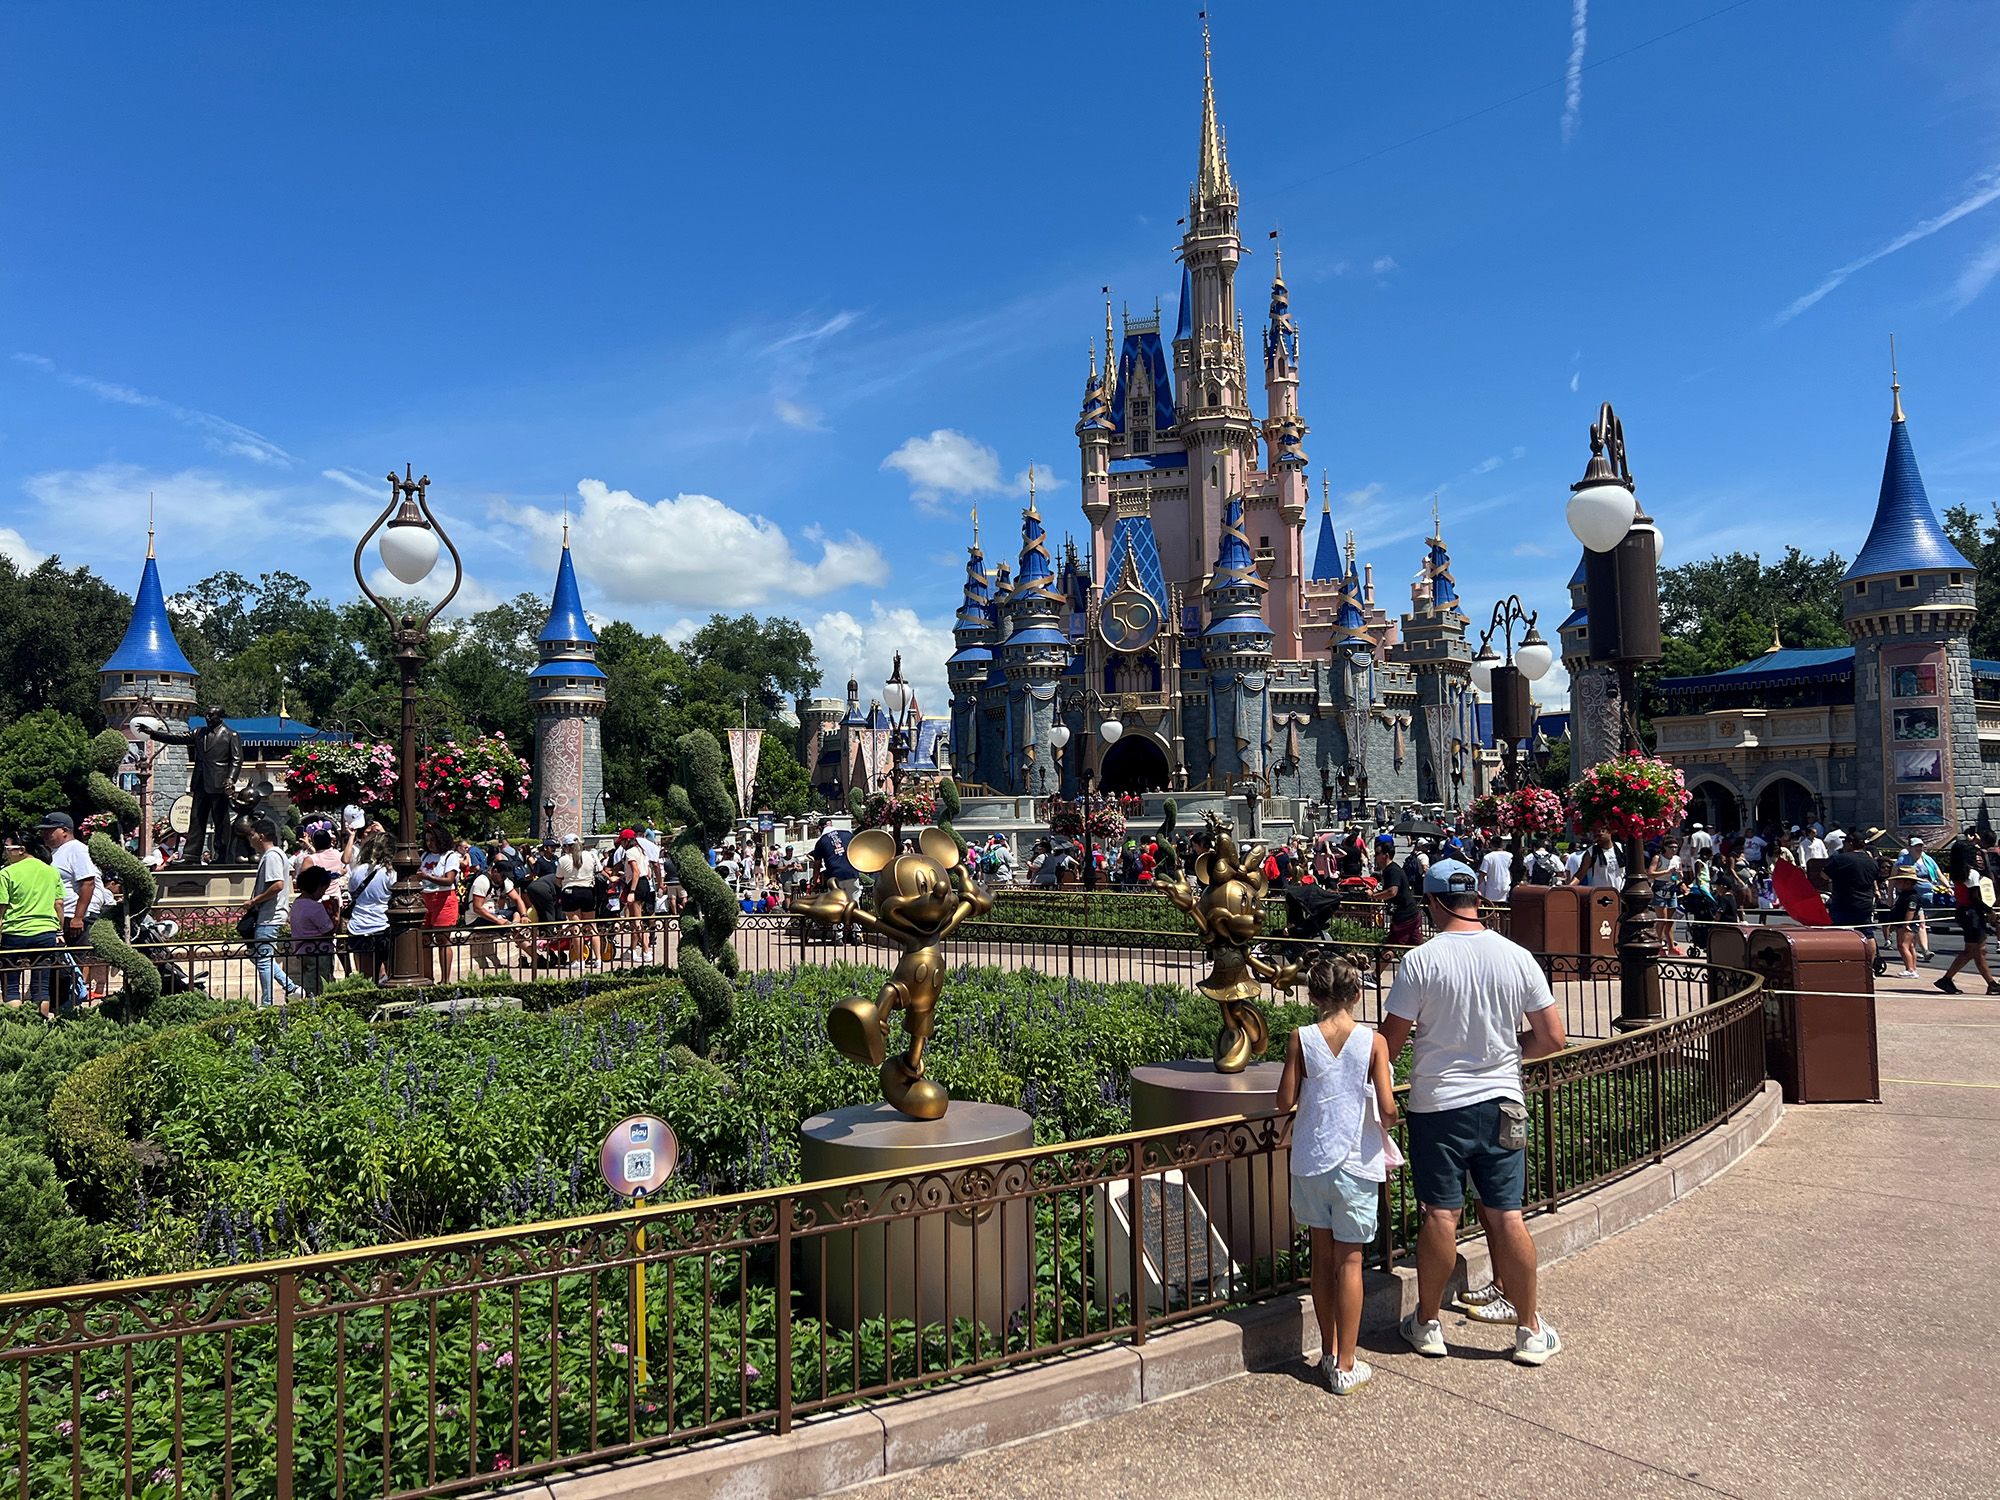 You Can Now Purchase Disneyland Tickets and Make Parks Reservations Together